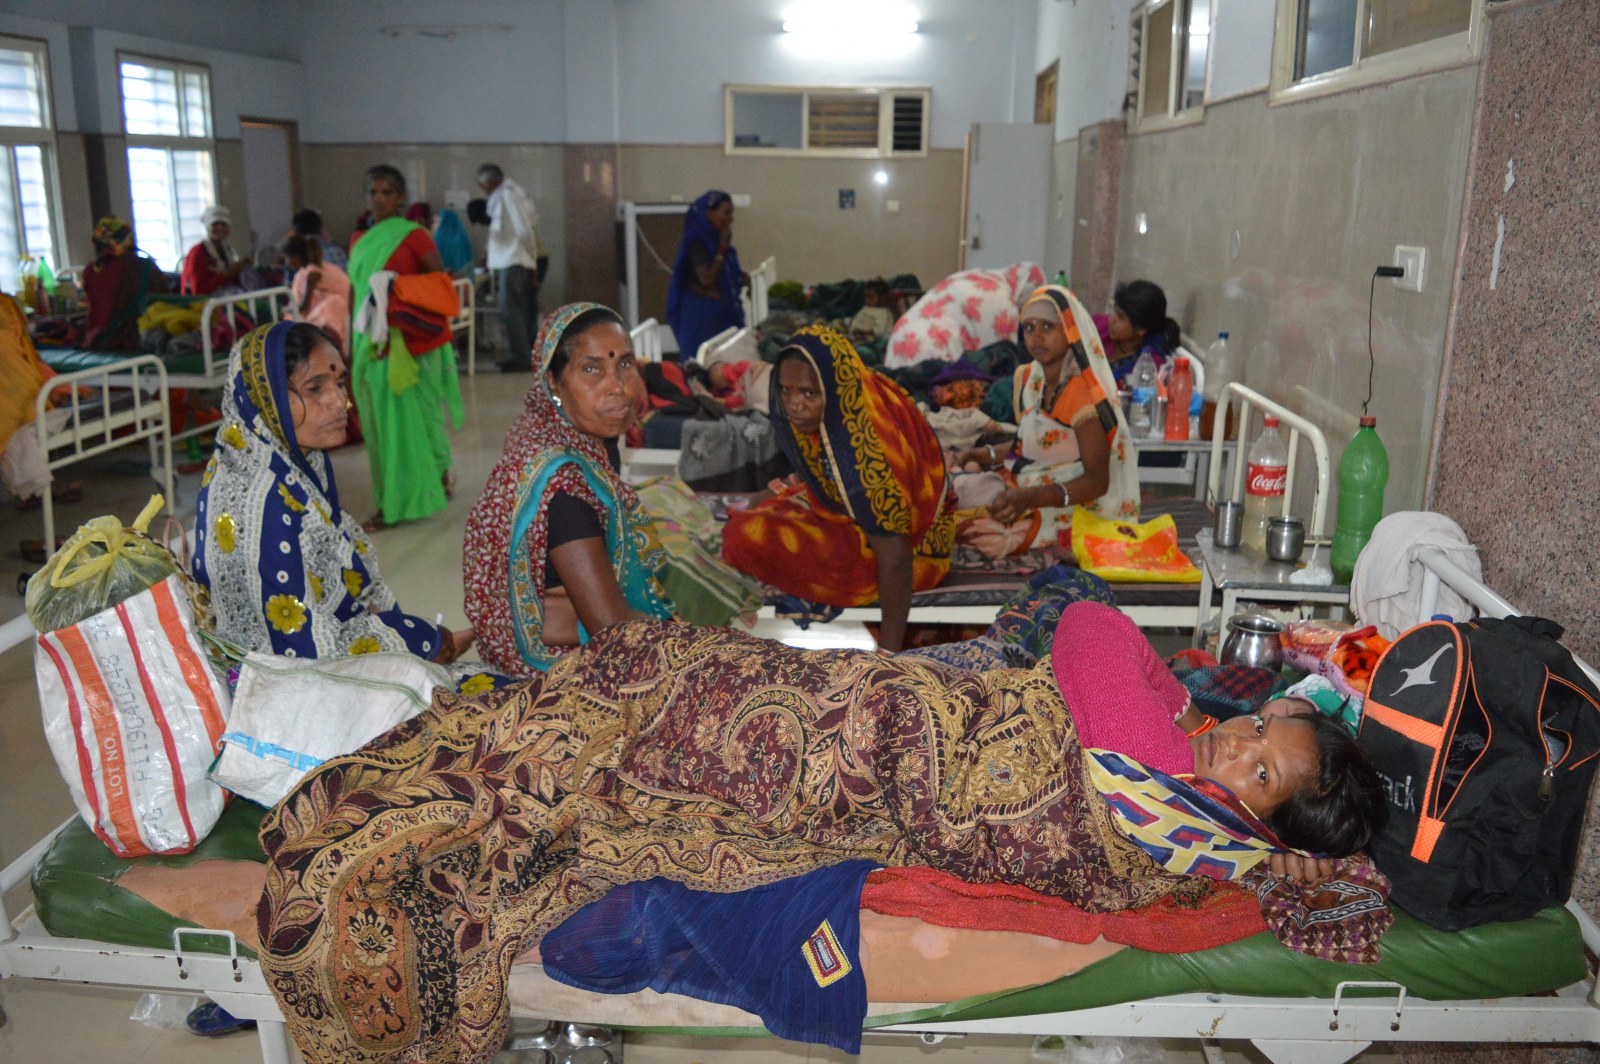 Damoh District Hospital, the obstetricians are not getting adequate